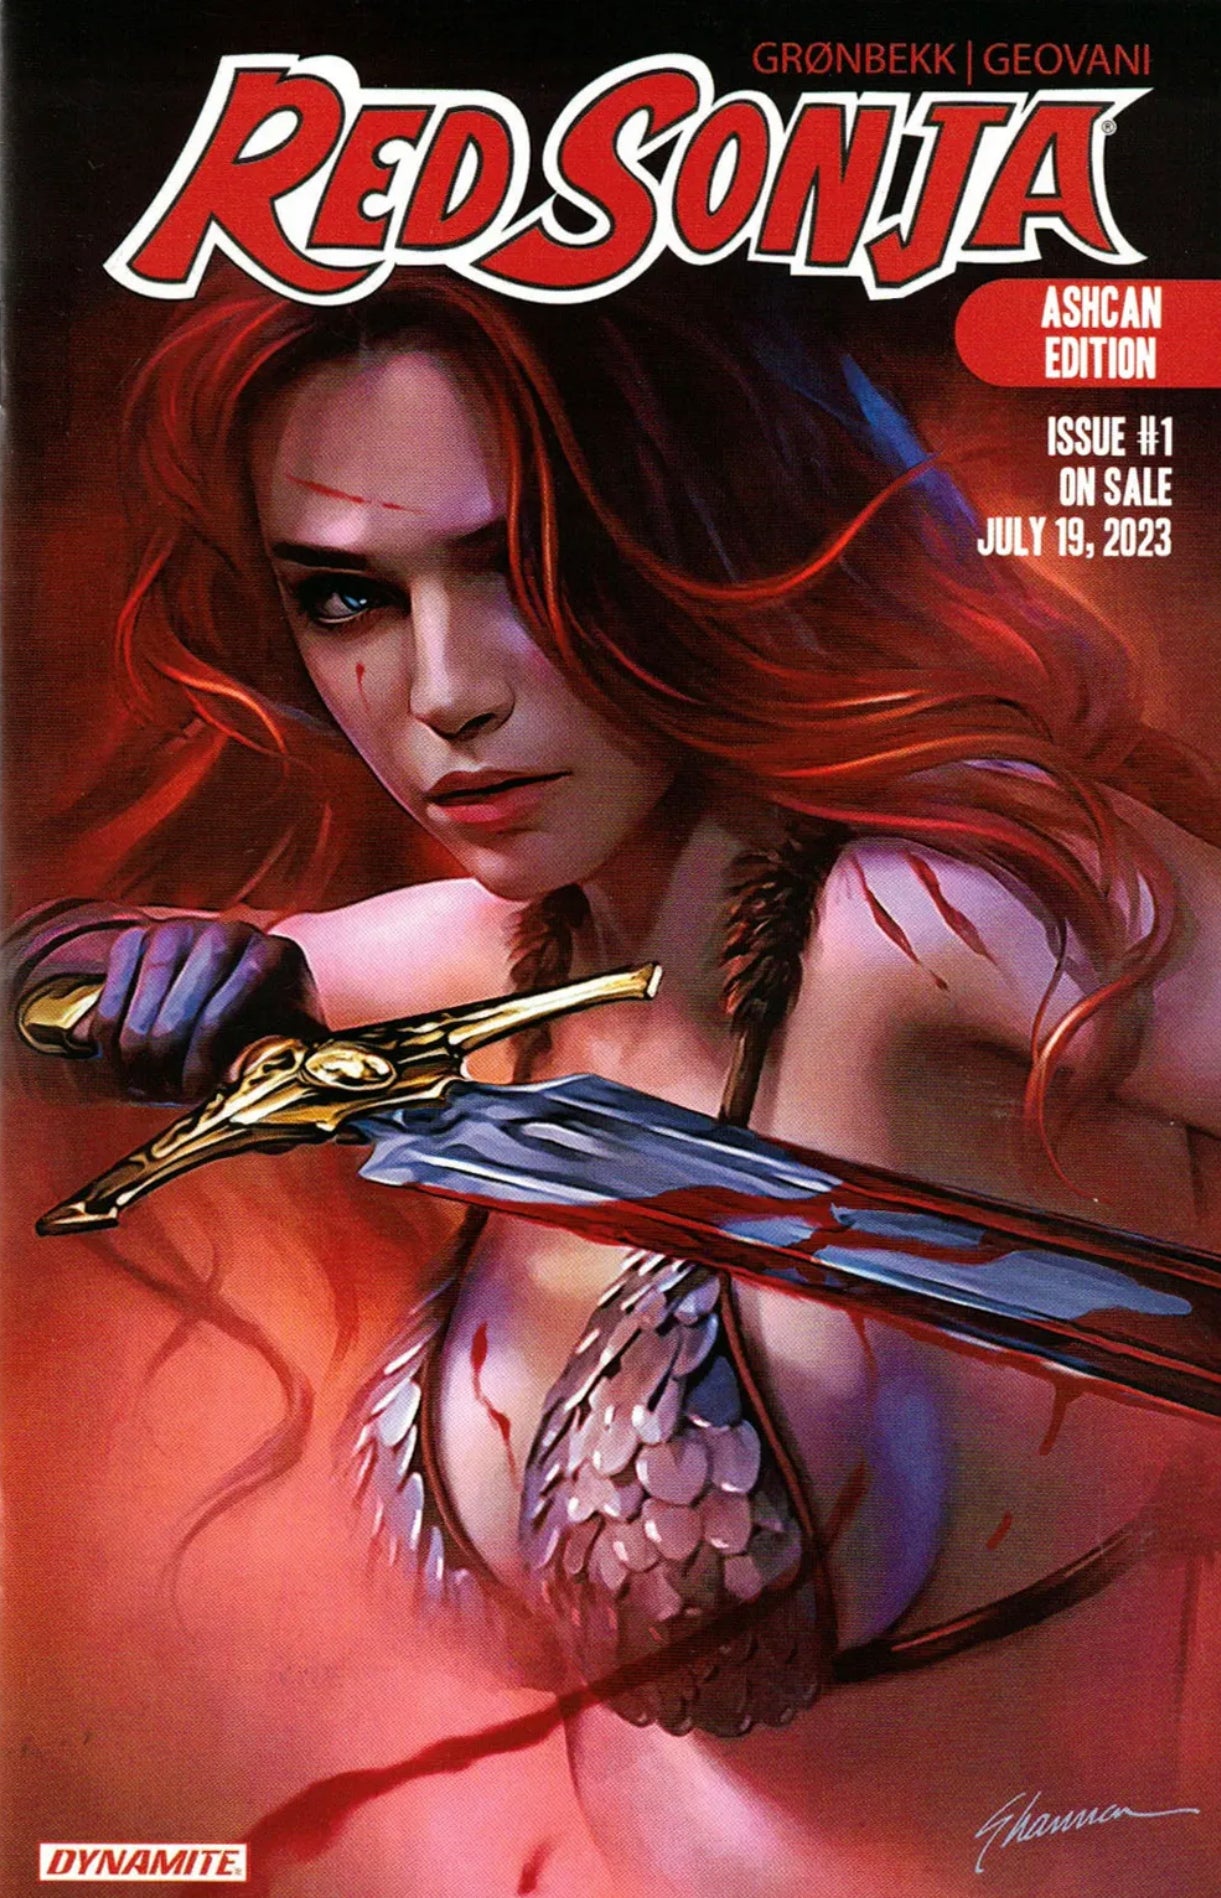 RED SONJA #1 2023 SHANNON MAER Ashcan Edition